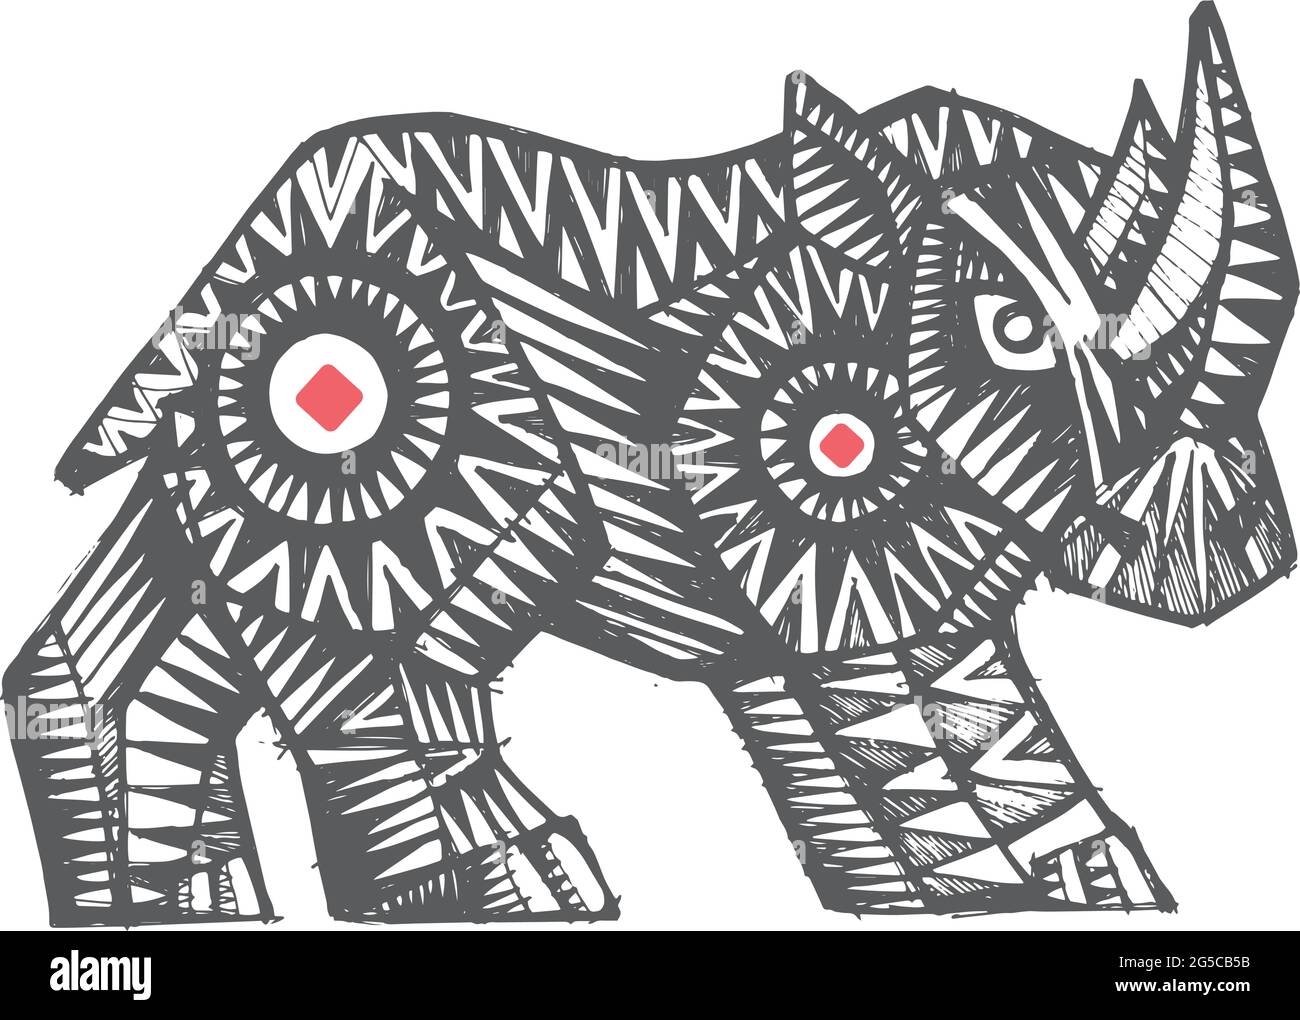 Hand drawn vector illustration or drawing of a mexican indigenous rhino in a traditional alebrije style Stock Vector